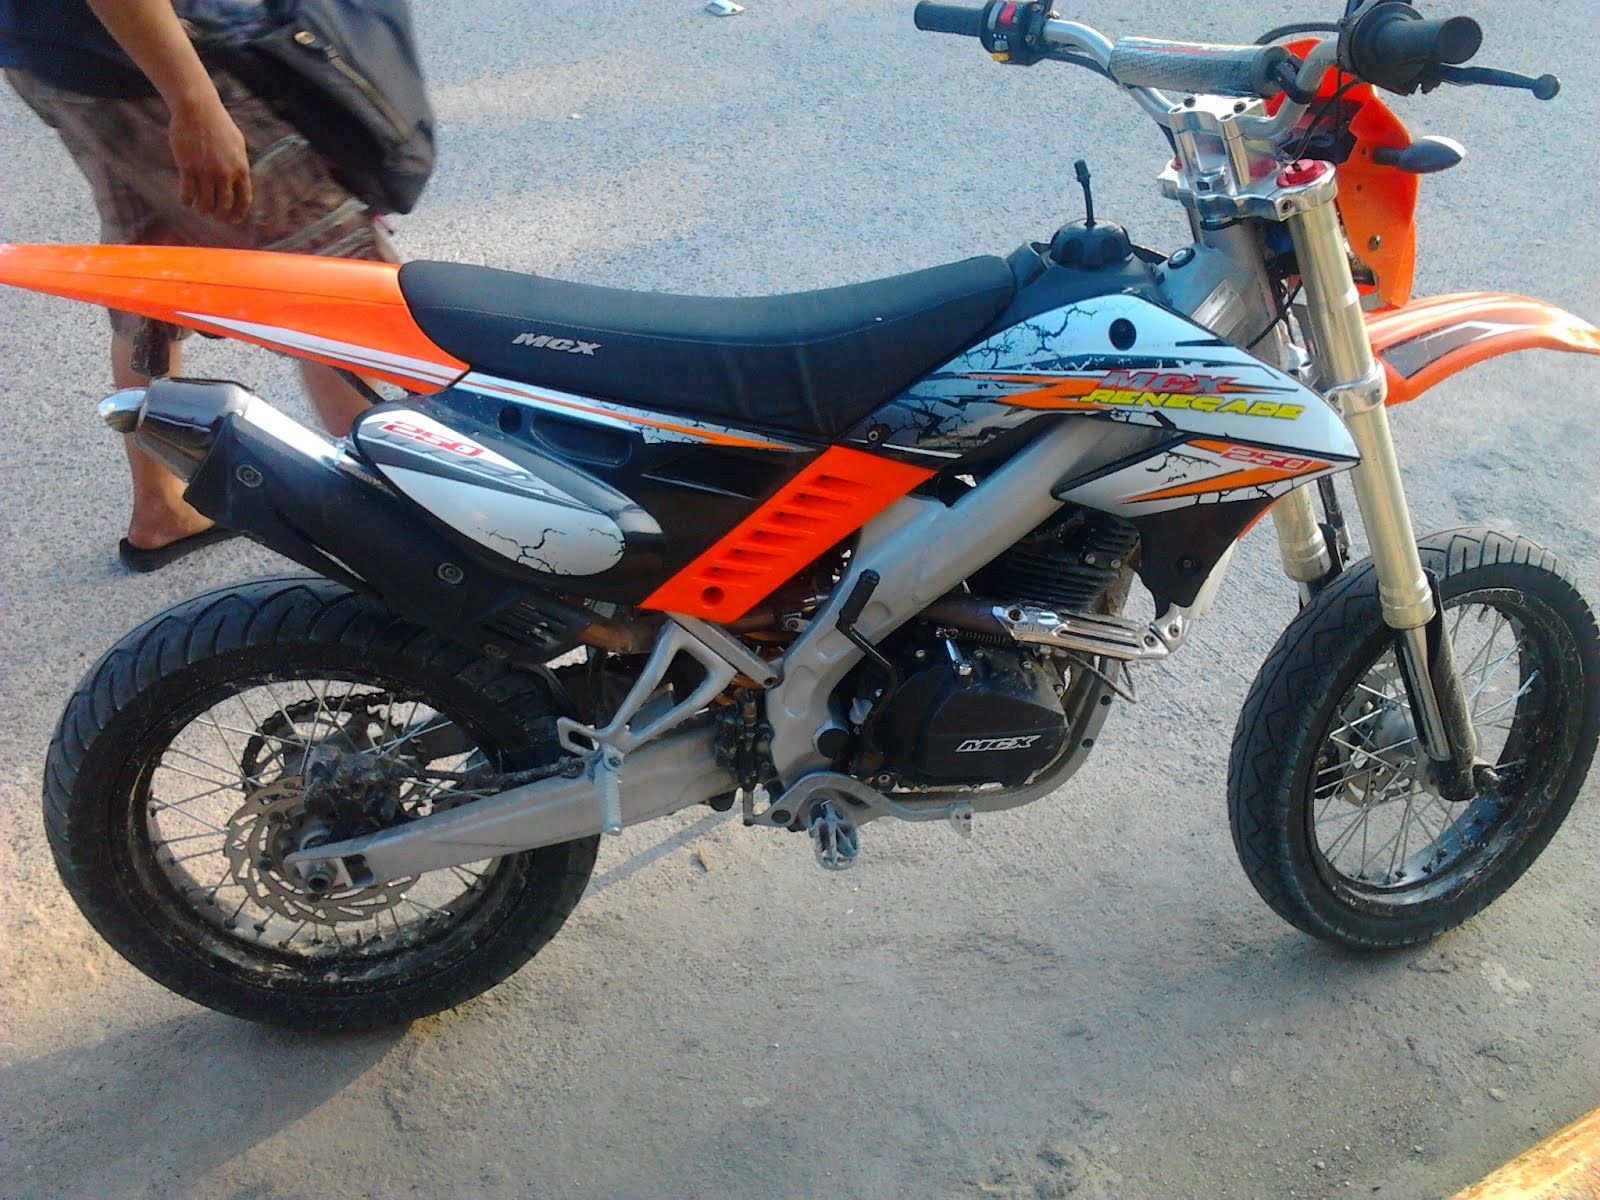 My BLOG: For Sale Motorcycle